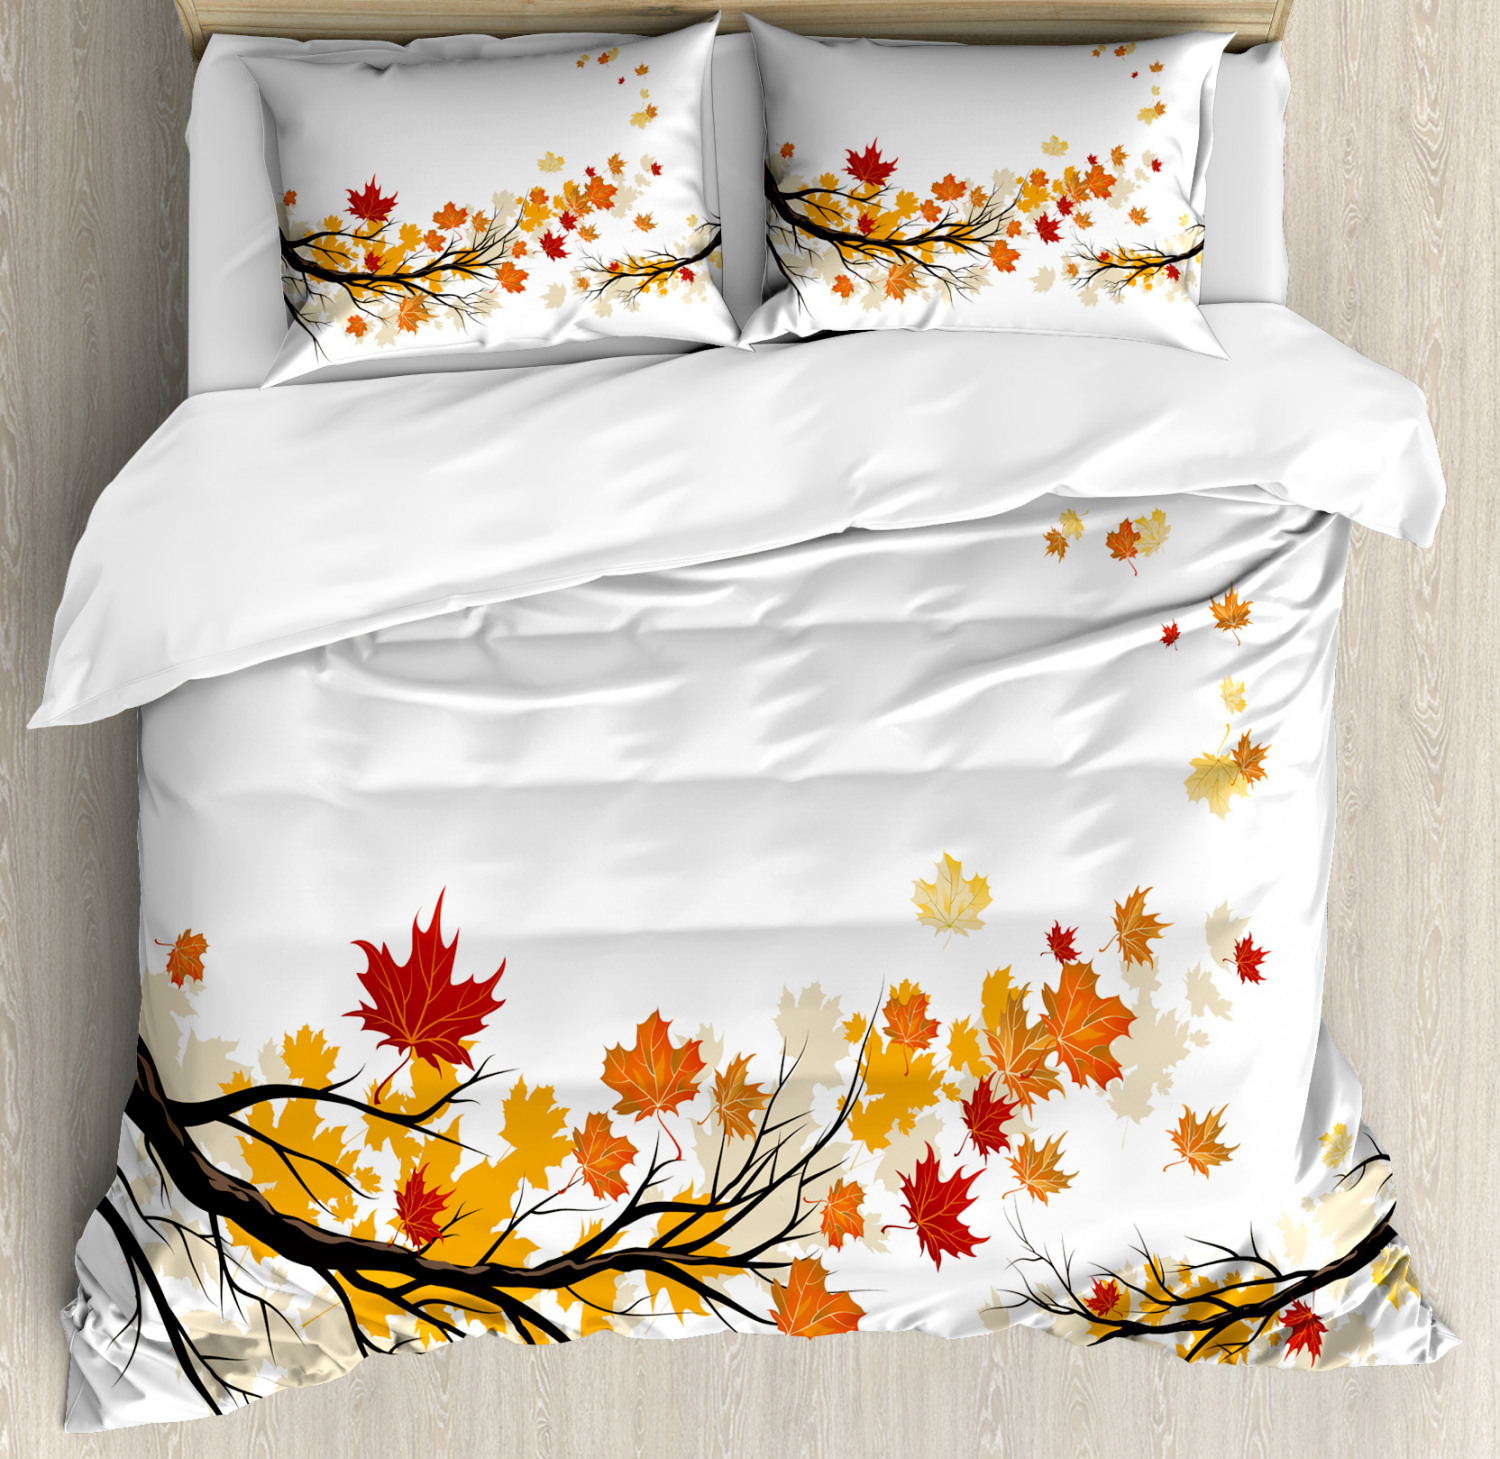 Pastoral Duvet Cover Set With Pillow Shams Autumn Tree Branches